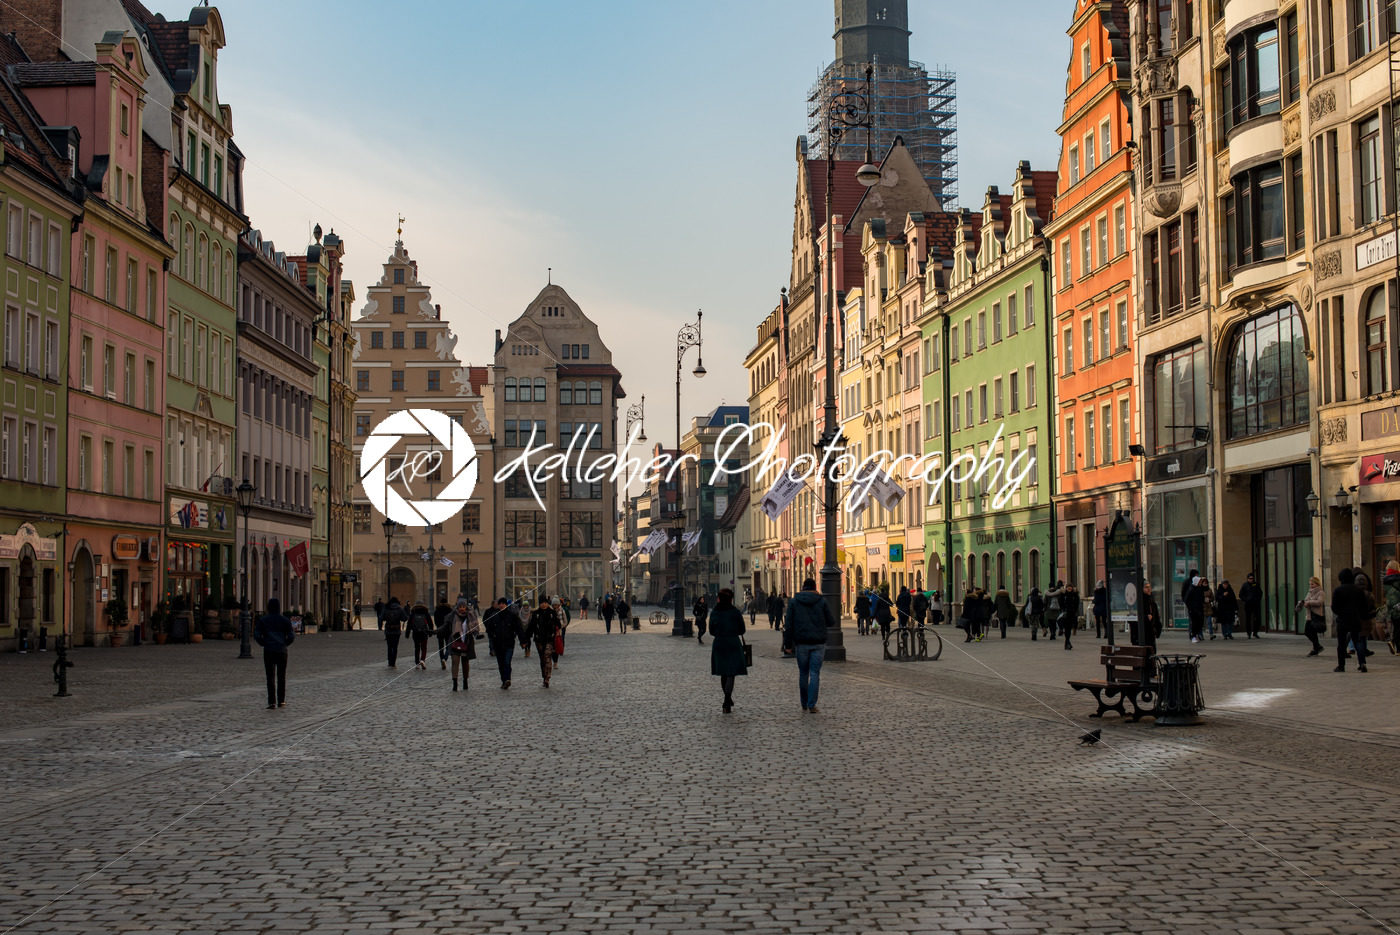 Wroclaw, Poland – March 4, 2018: Wroclaw Market Square in evening in historic capital of Silesia, Poland, Europe. - Kelleher Photography Store